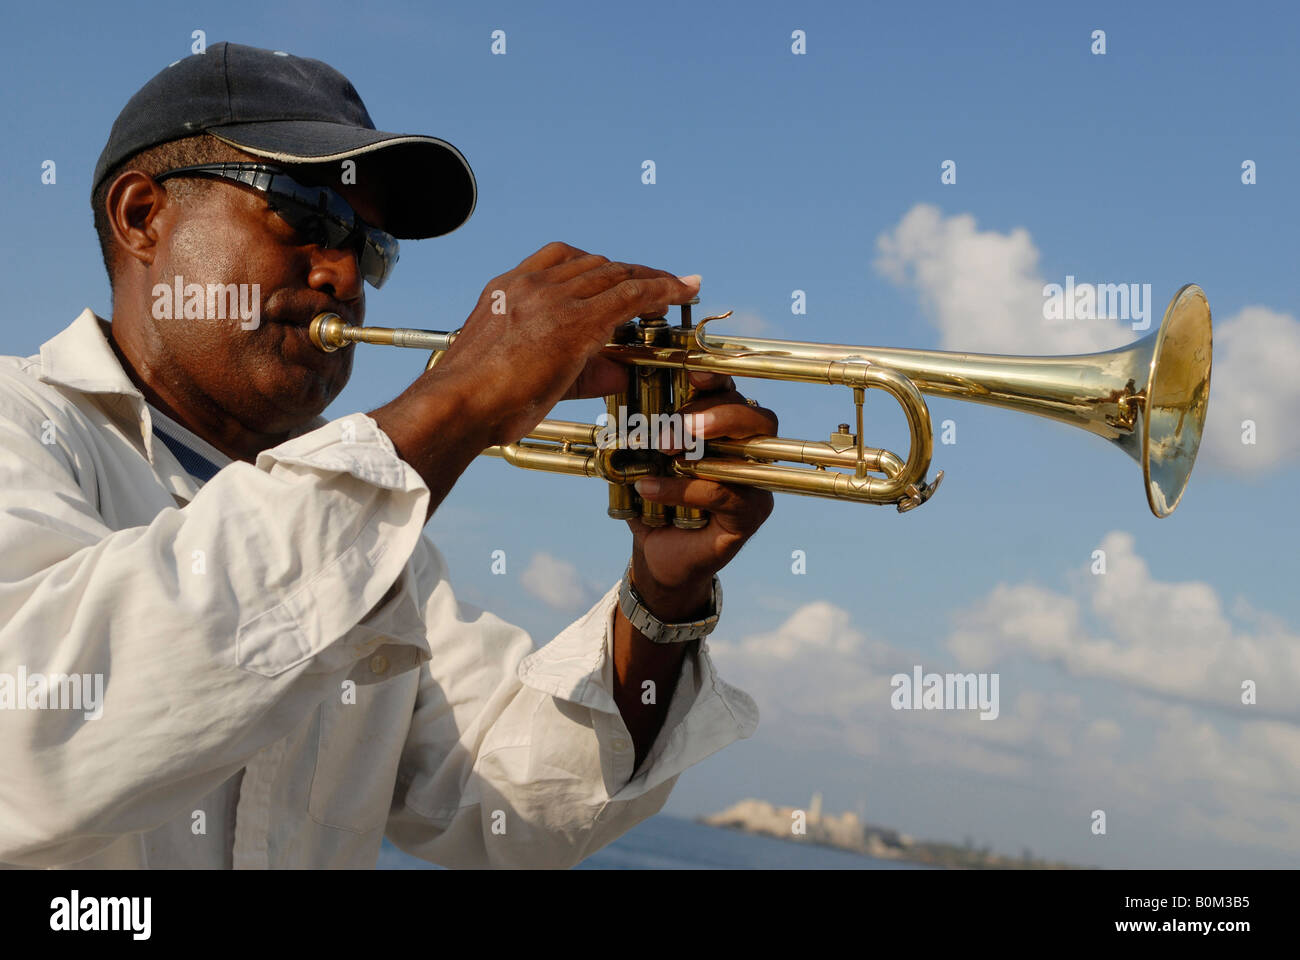 Portrait of a middle aged trumpeter at the Malecon Boulevard in Havana Cuba April 2007 Stock Photo